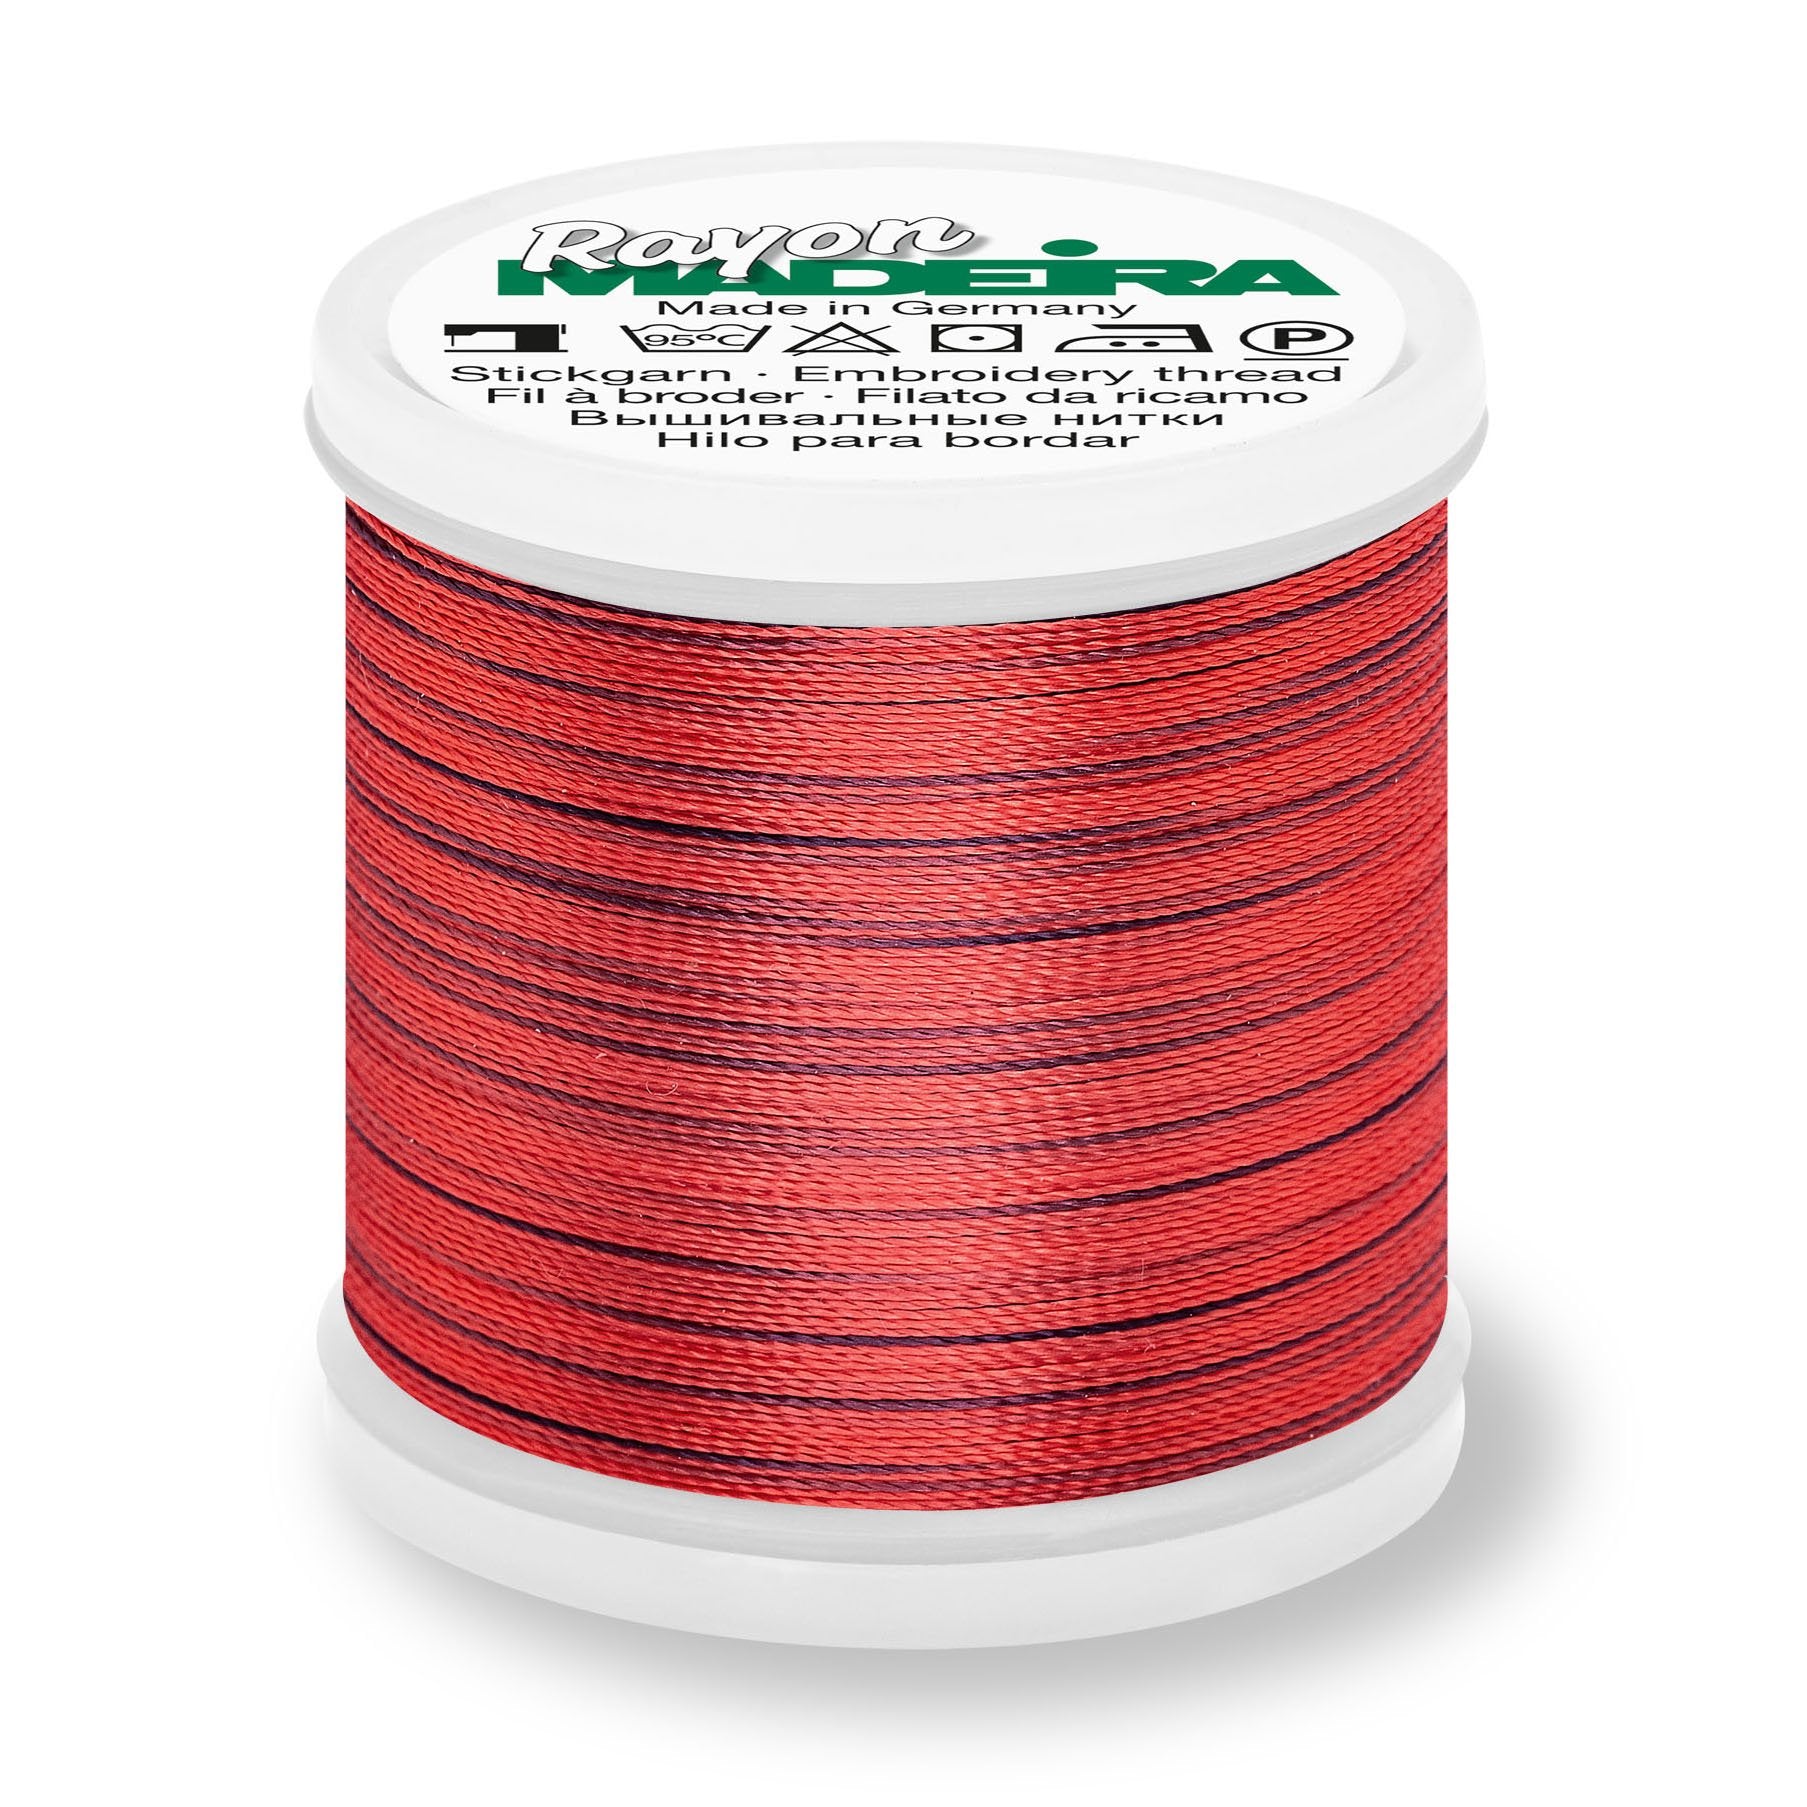 Madeira Rayon 40 Embroidery Thread 200m Potpourri 2309 Deep Pink from Jaycotts Sewing Supplies